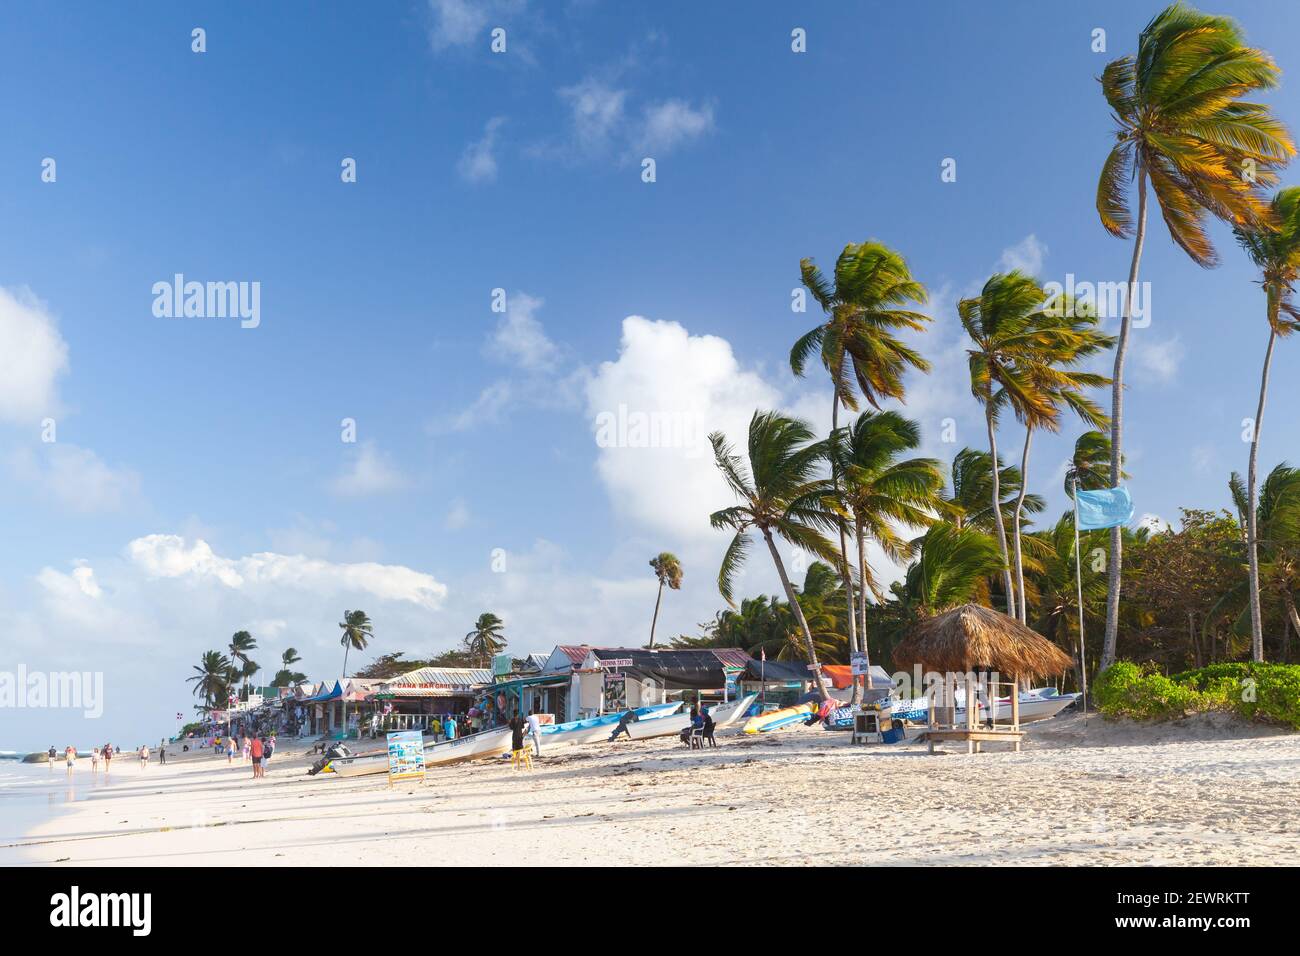 Punta Cana, Dominican republic - January 15, 2020: Tourists and staff are on a sandy beach of Punta Cana resort near small souvenir shops and beach re Stock Photo